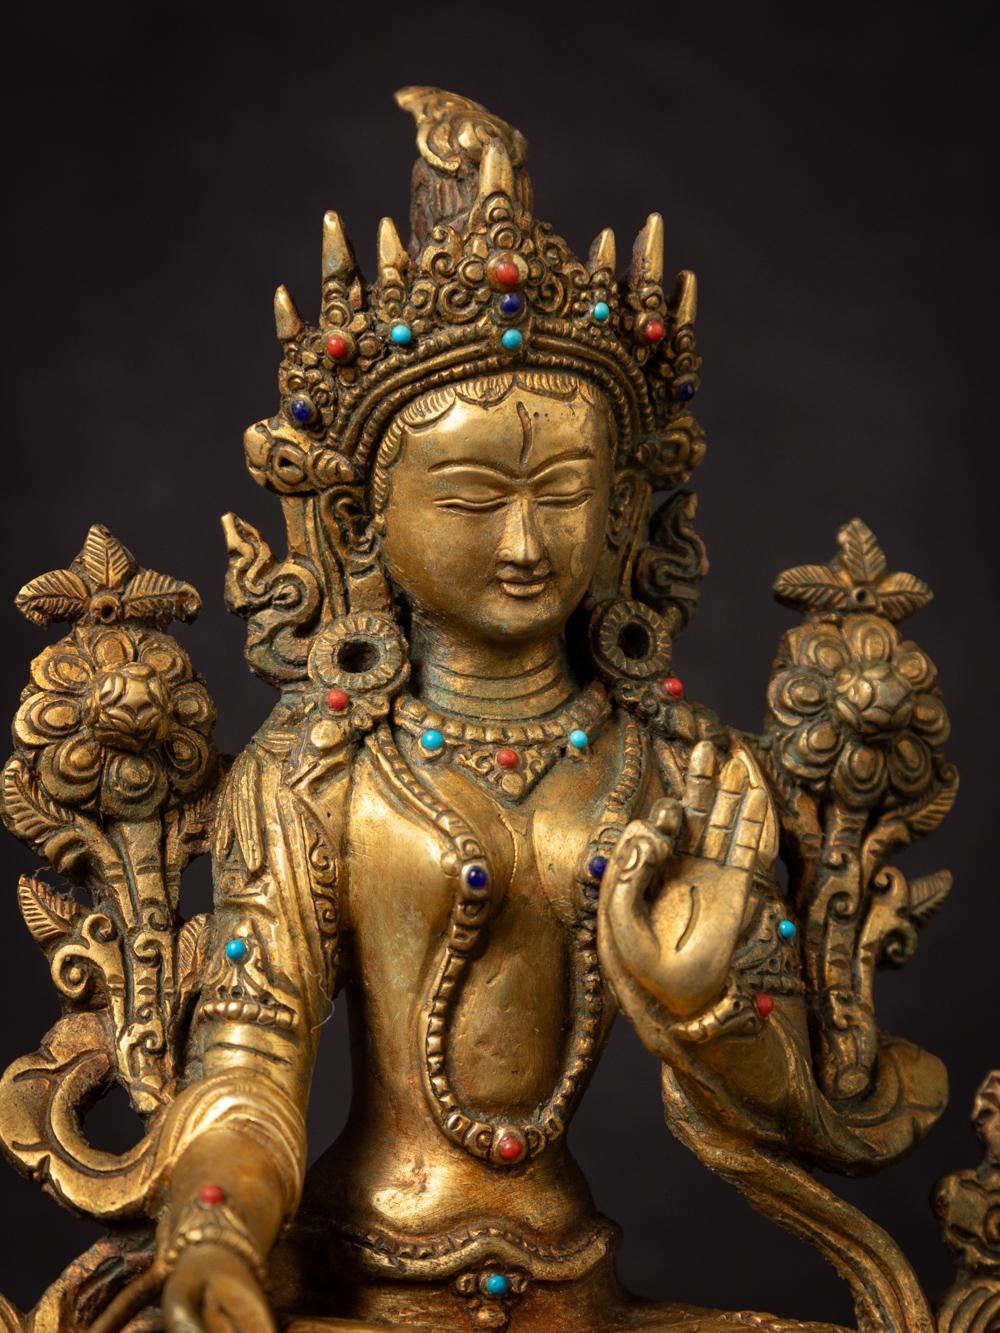 This Old bronze Nepali Aparmita Buddha statue is a remarkable piece of art that reflects the rich cultural and religious traditions of Nepal. Crafted from bronze and fire-gilded with 24-karat gold, this statue stands at a height of 21,9 cm, with